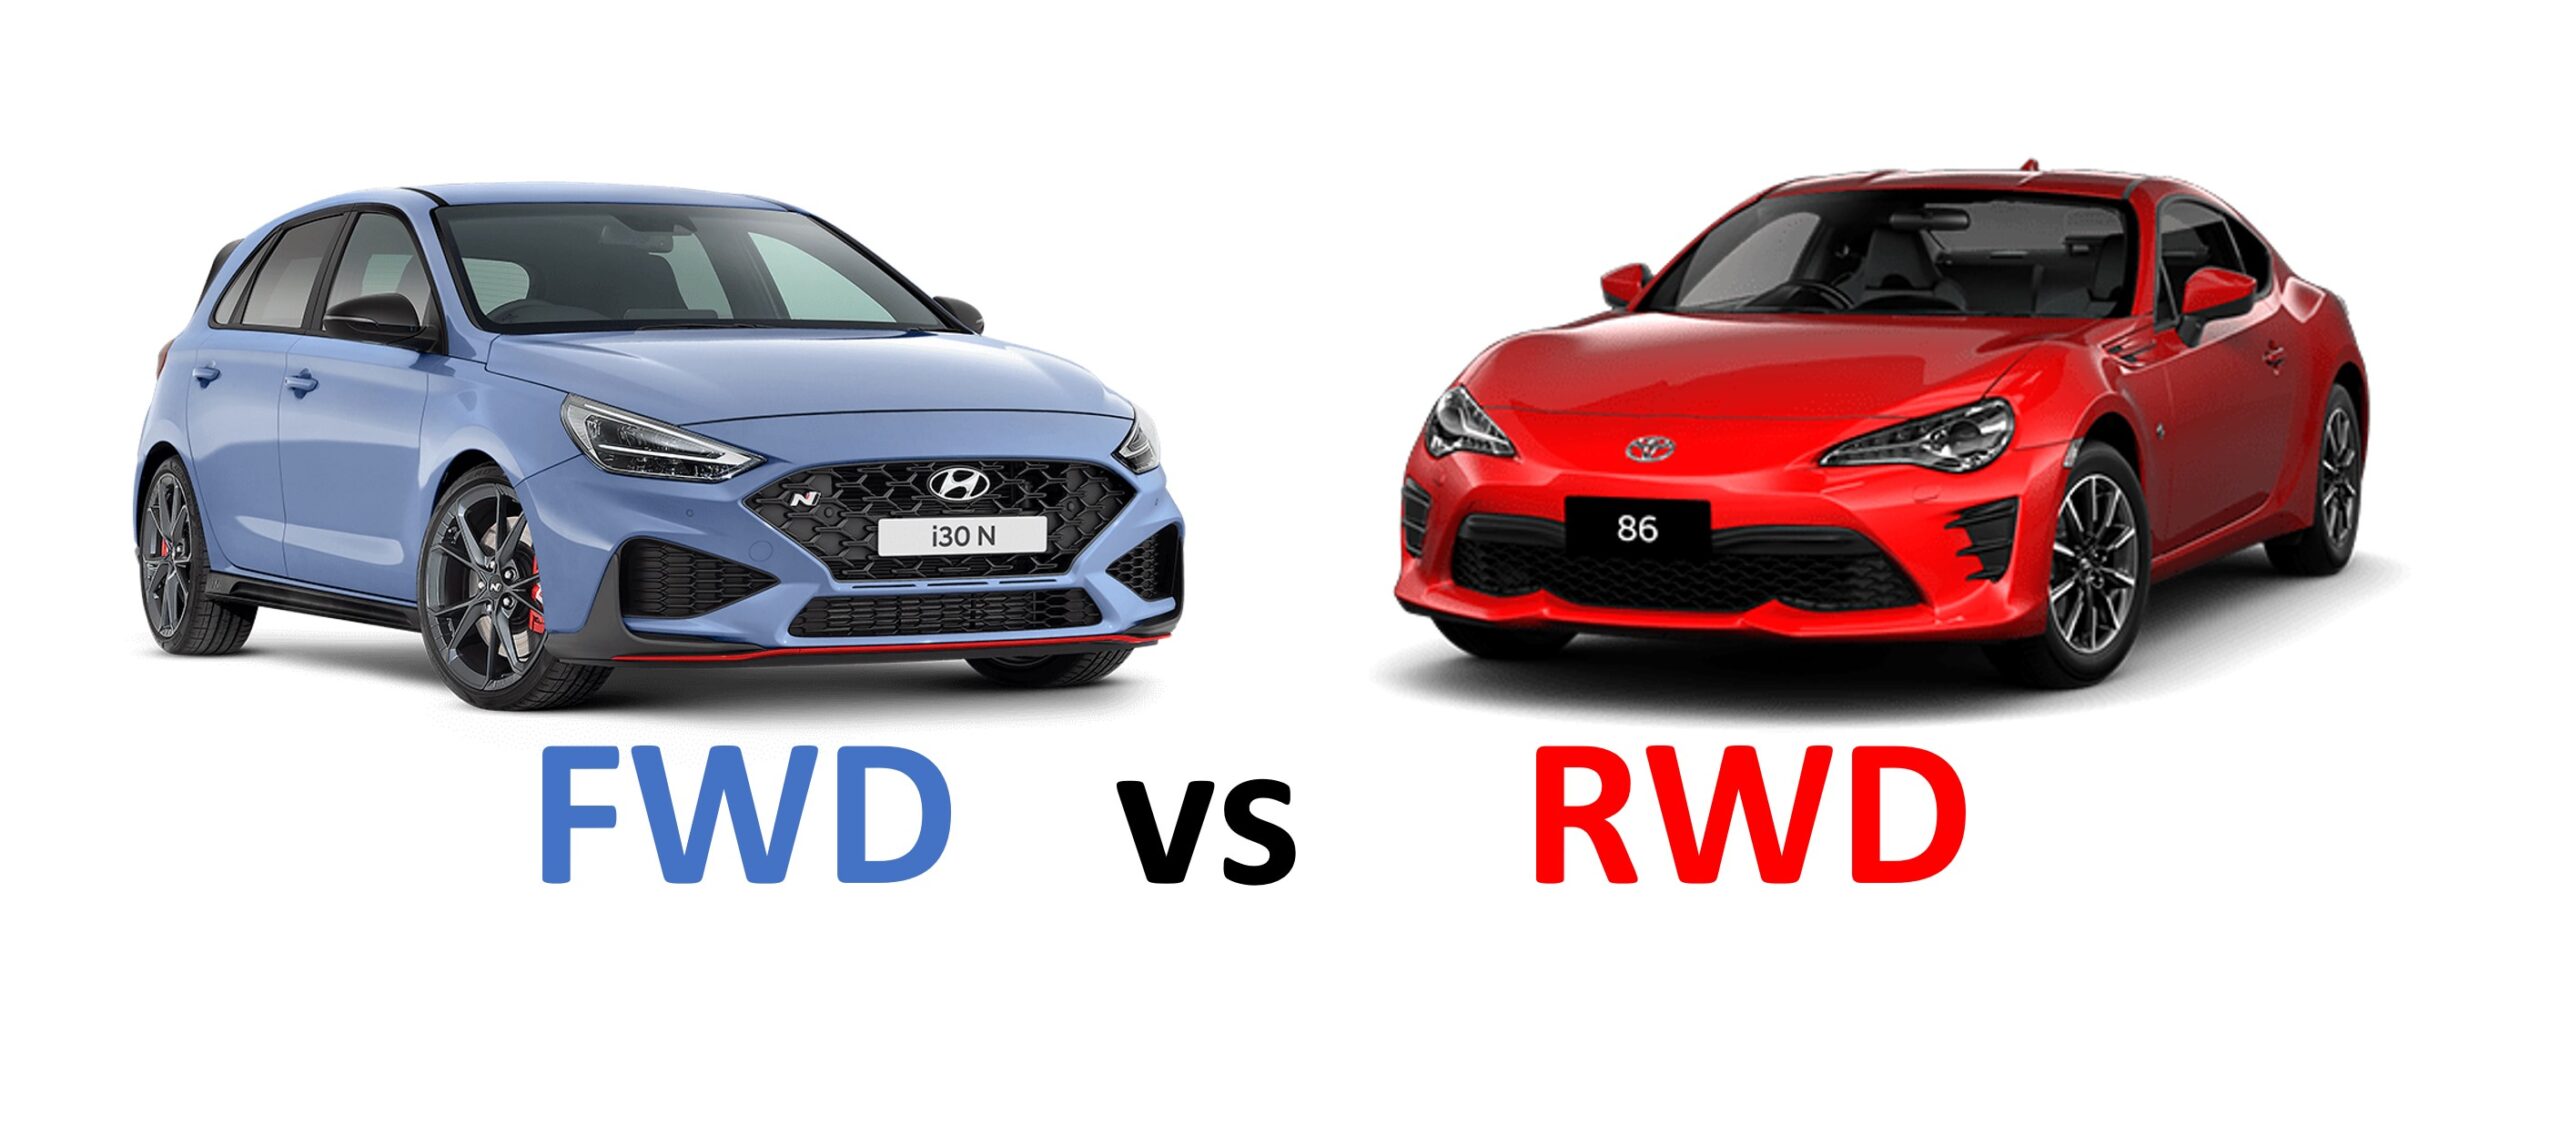 What are the driving technique differences between RWD and FWD?